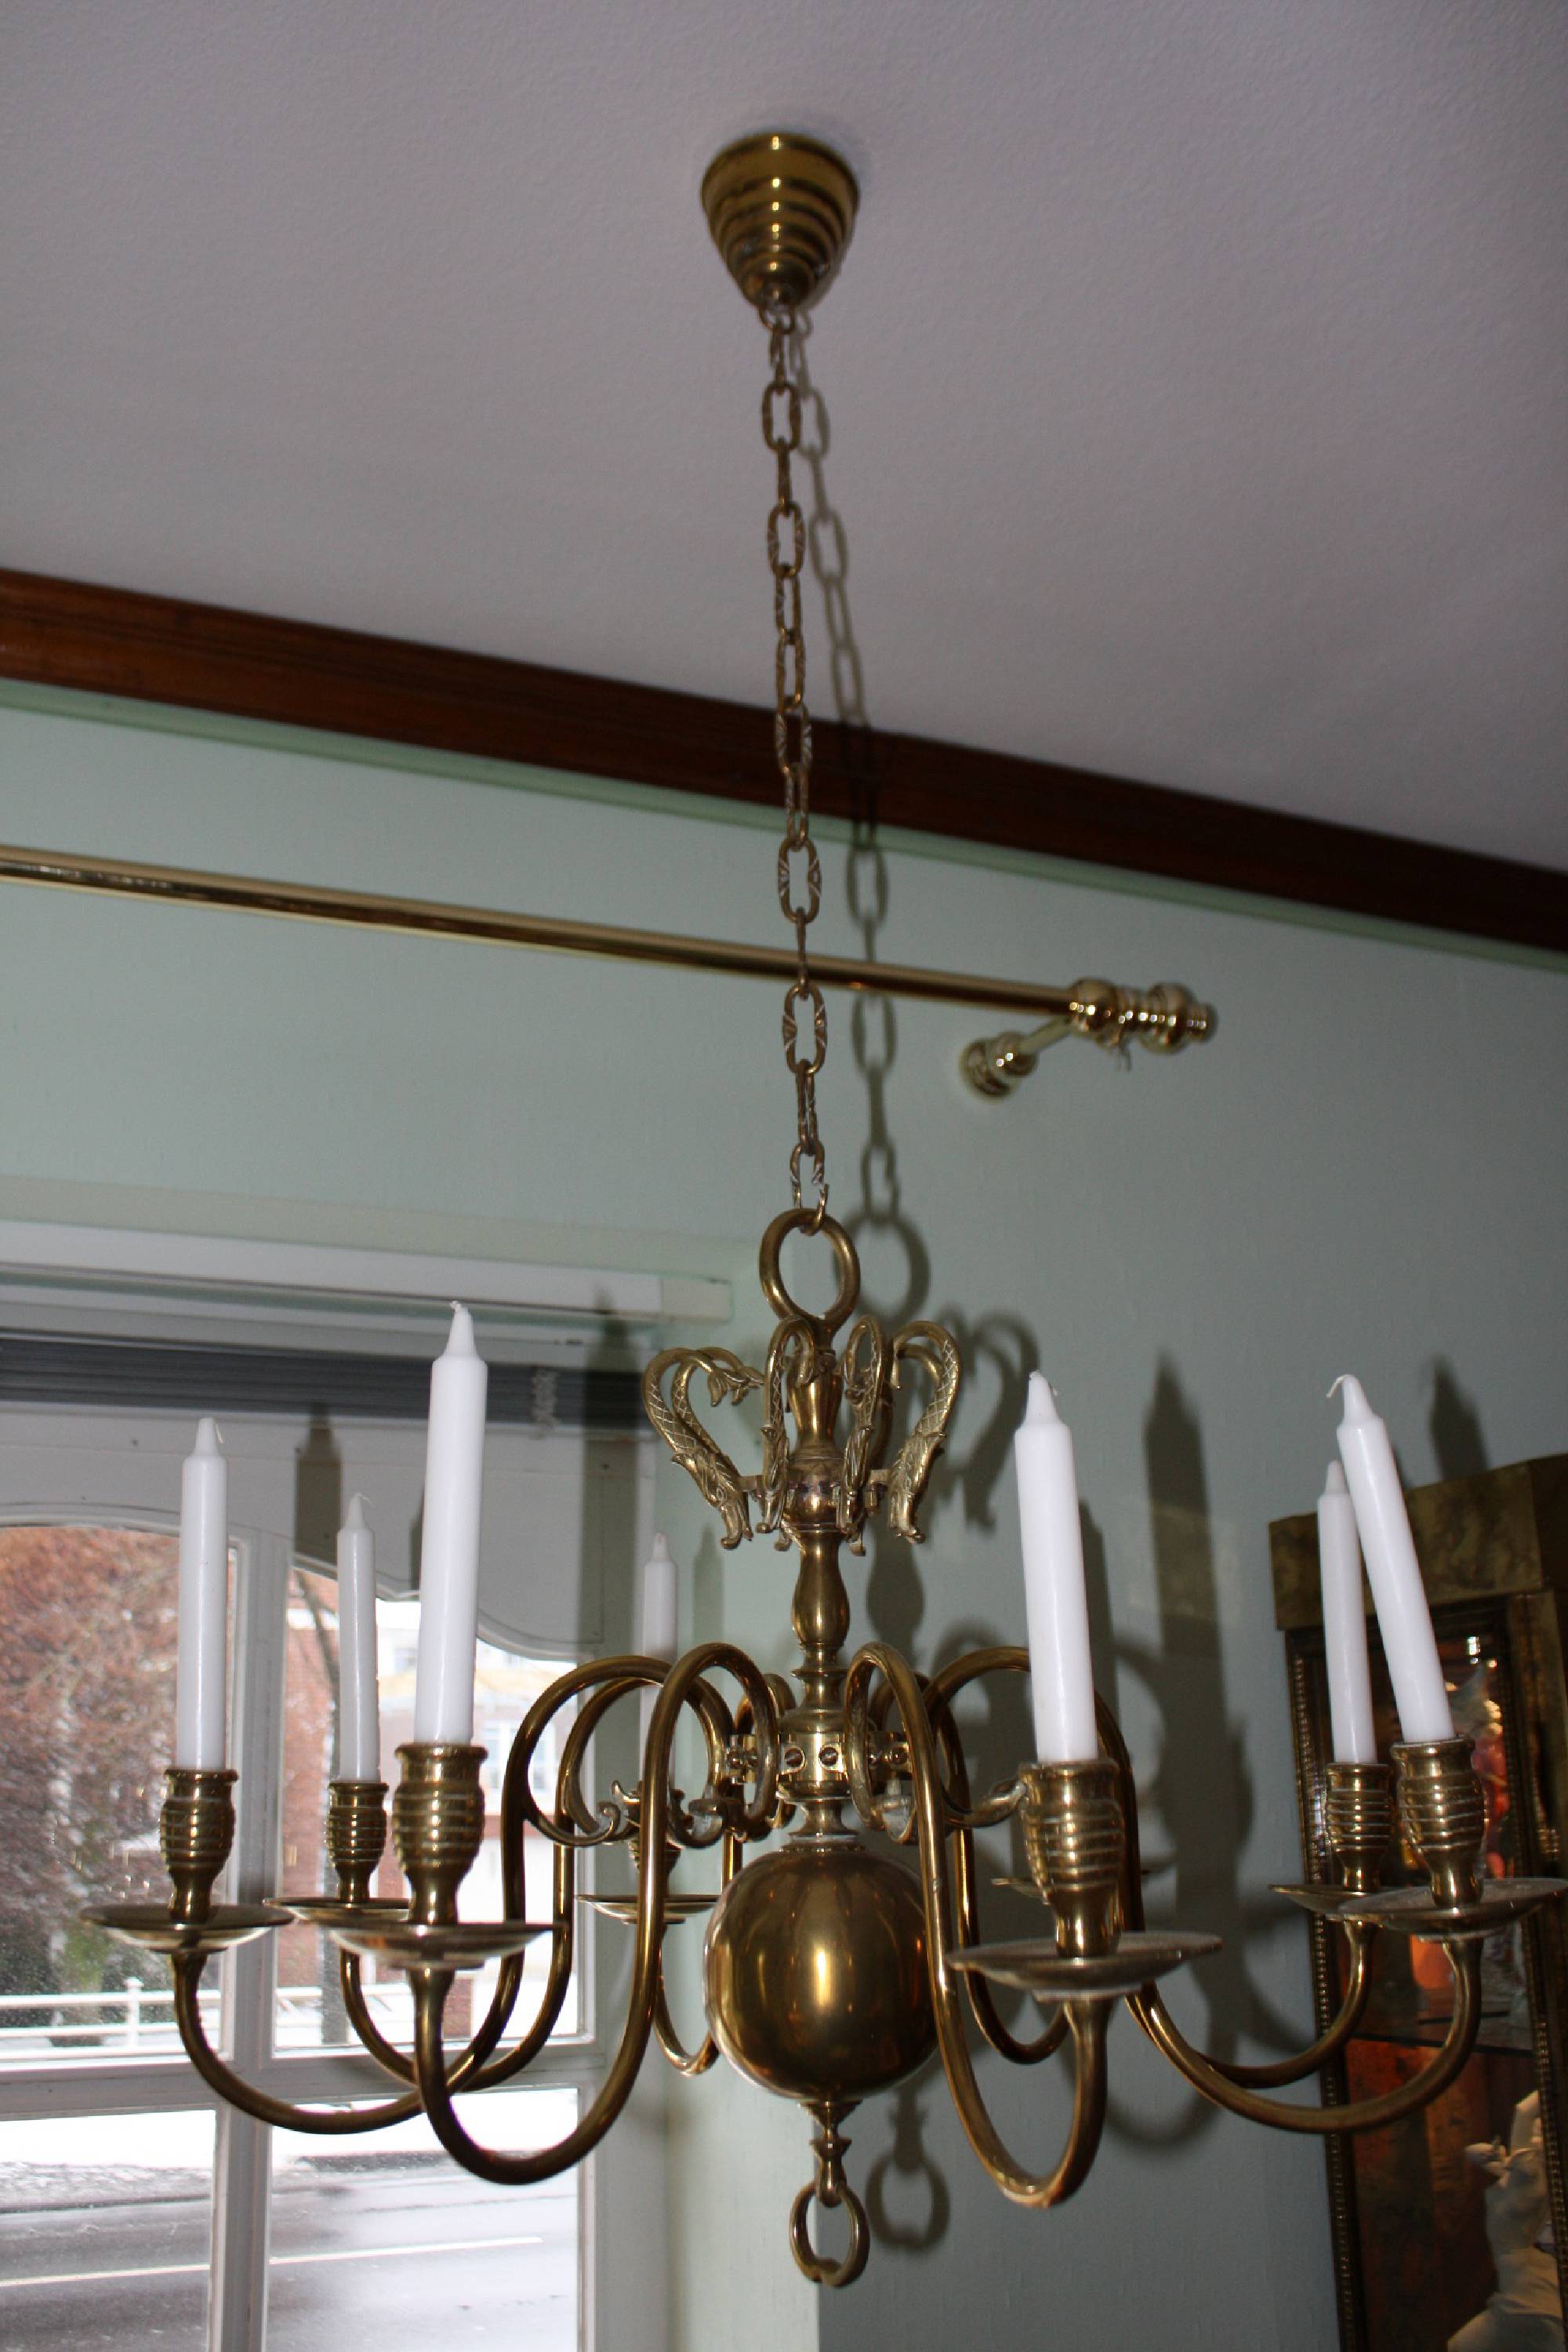 A 19th century flamish or dutch all brass antique chandelier with 8 arms